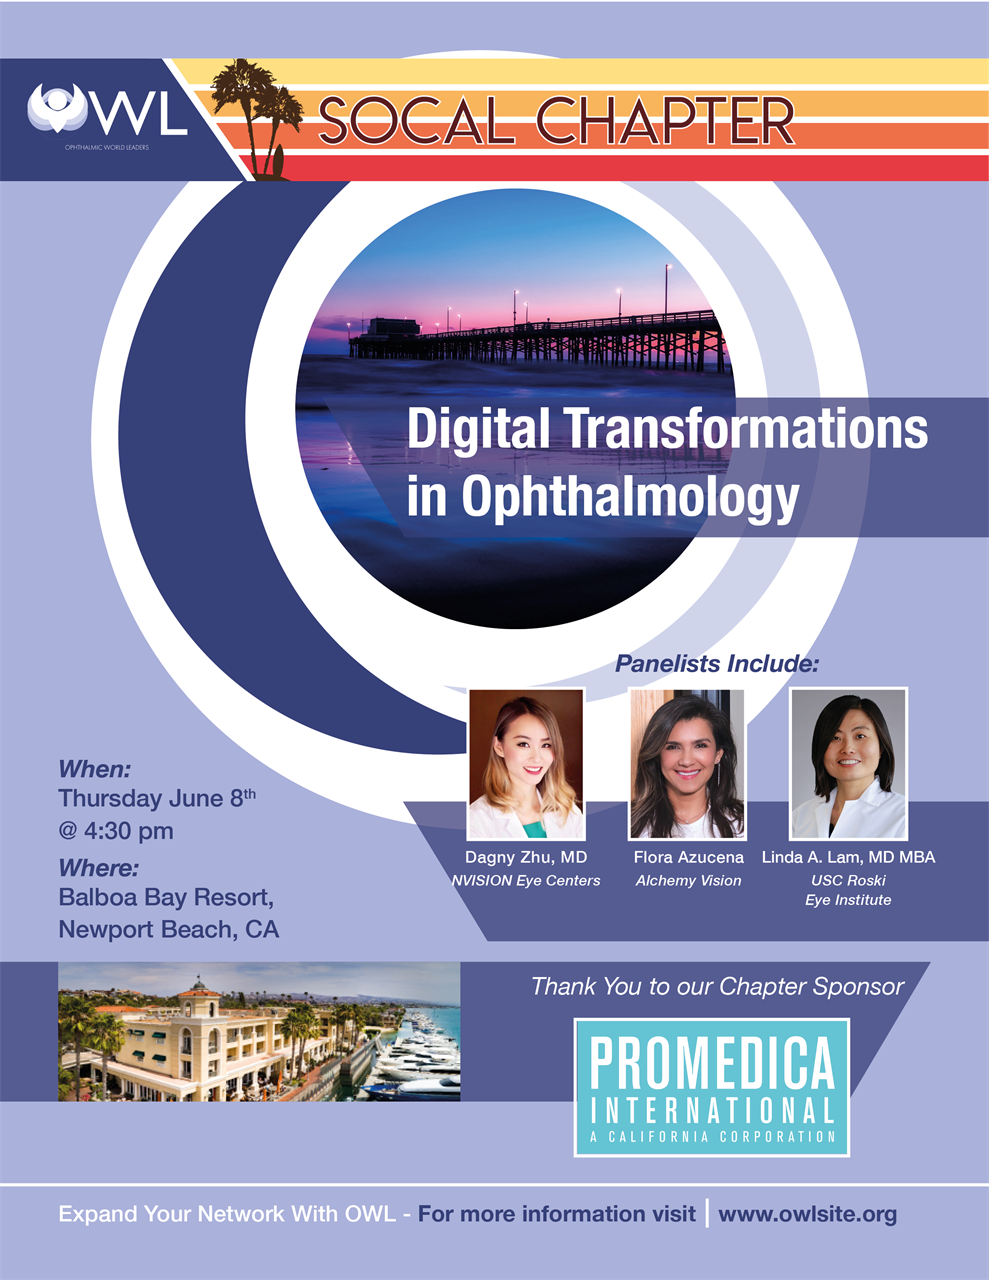 Expand your network with OWL - join us for our Digital Transformations in Ophthalmology program with OWL's SoCal Chapter! When: Thurs, June 8th @ 4:30 PM; Where: Balboa Bay Resort, 1221 West Coast Hwy, Newport Beach, CA 92663 | Panelists: Flora Azucena, Alchemy Vision; Linda A. Lam, MD, MBA, Professor in Ophthalmology at the USC Keck School of Medicine; and Dagny Zhu, MD, Medical Director & Partner at NVISION Eye Centers (Thank you to our Chapter Sponsor: Promedica International) Register now!